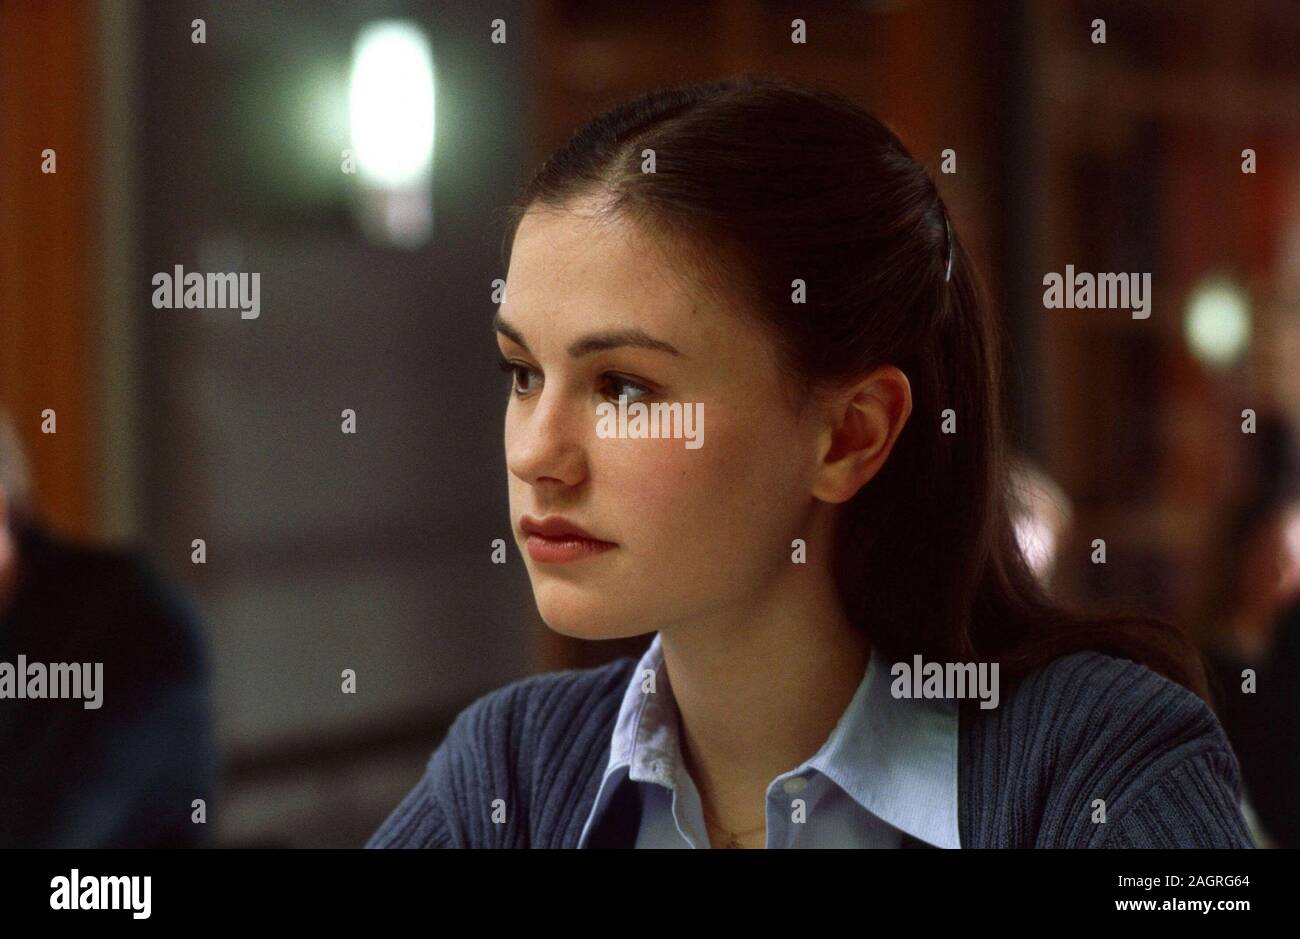 ANNA PAQUIN in FINDING FORRESTER (2000), directed by GUS VAN SANT. Credit: COLUMBIA PICTURES / Album Stock Photo